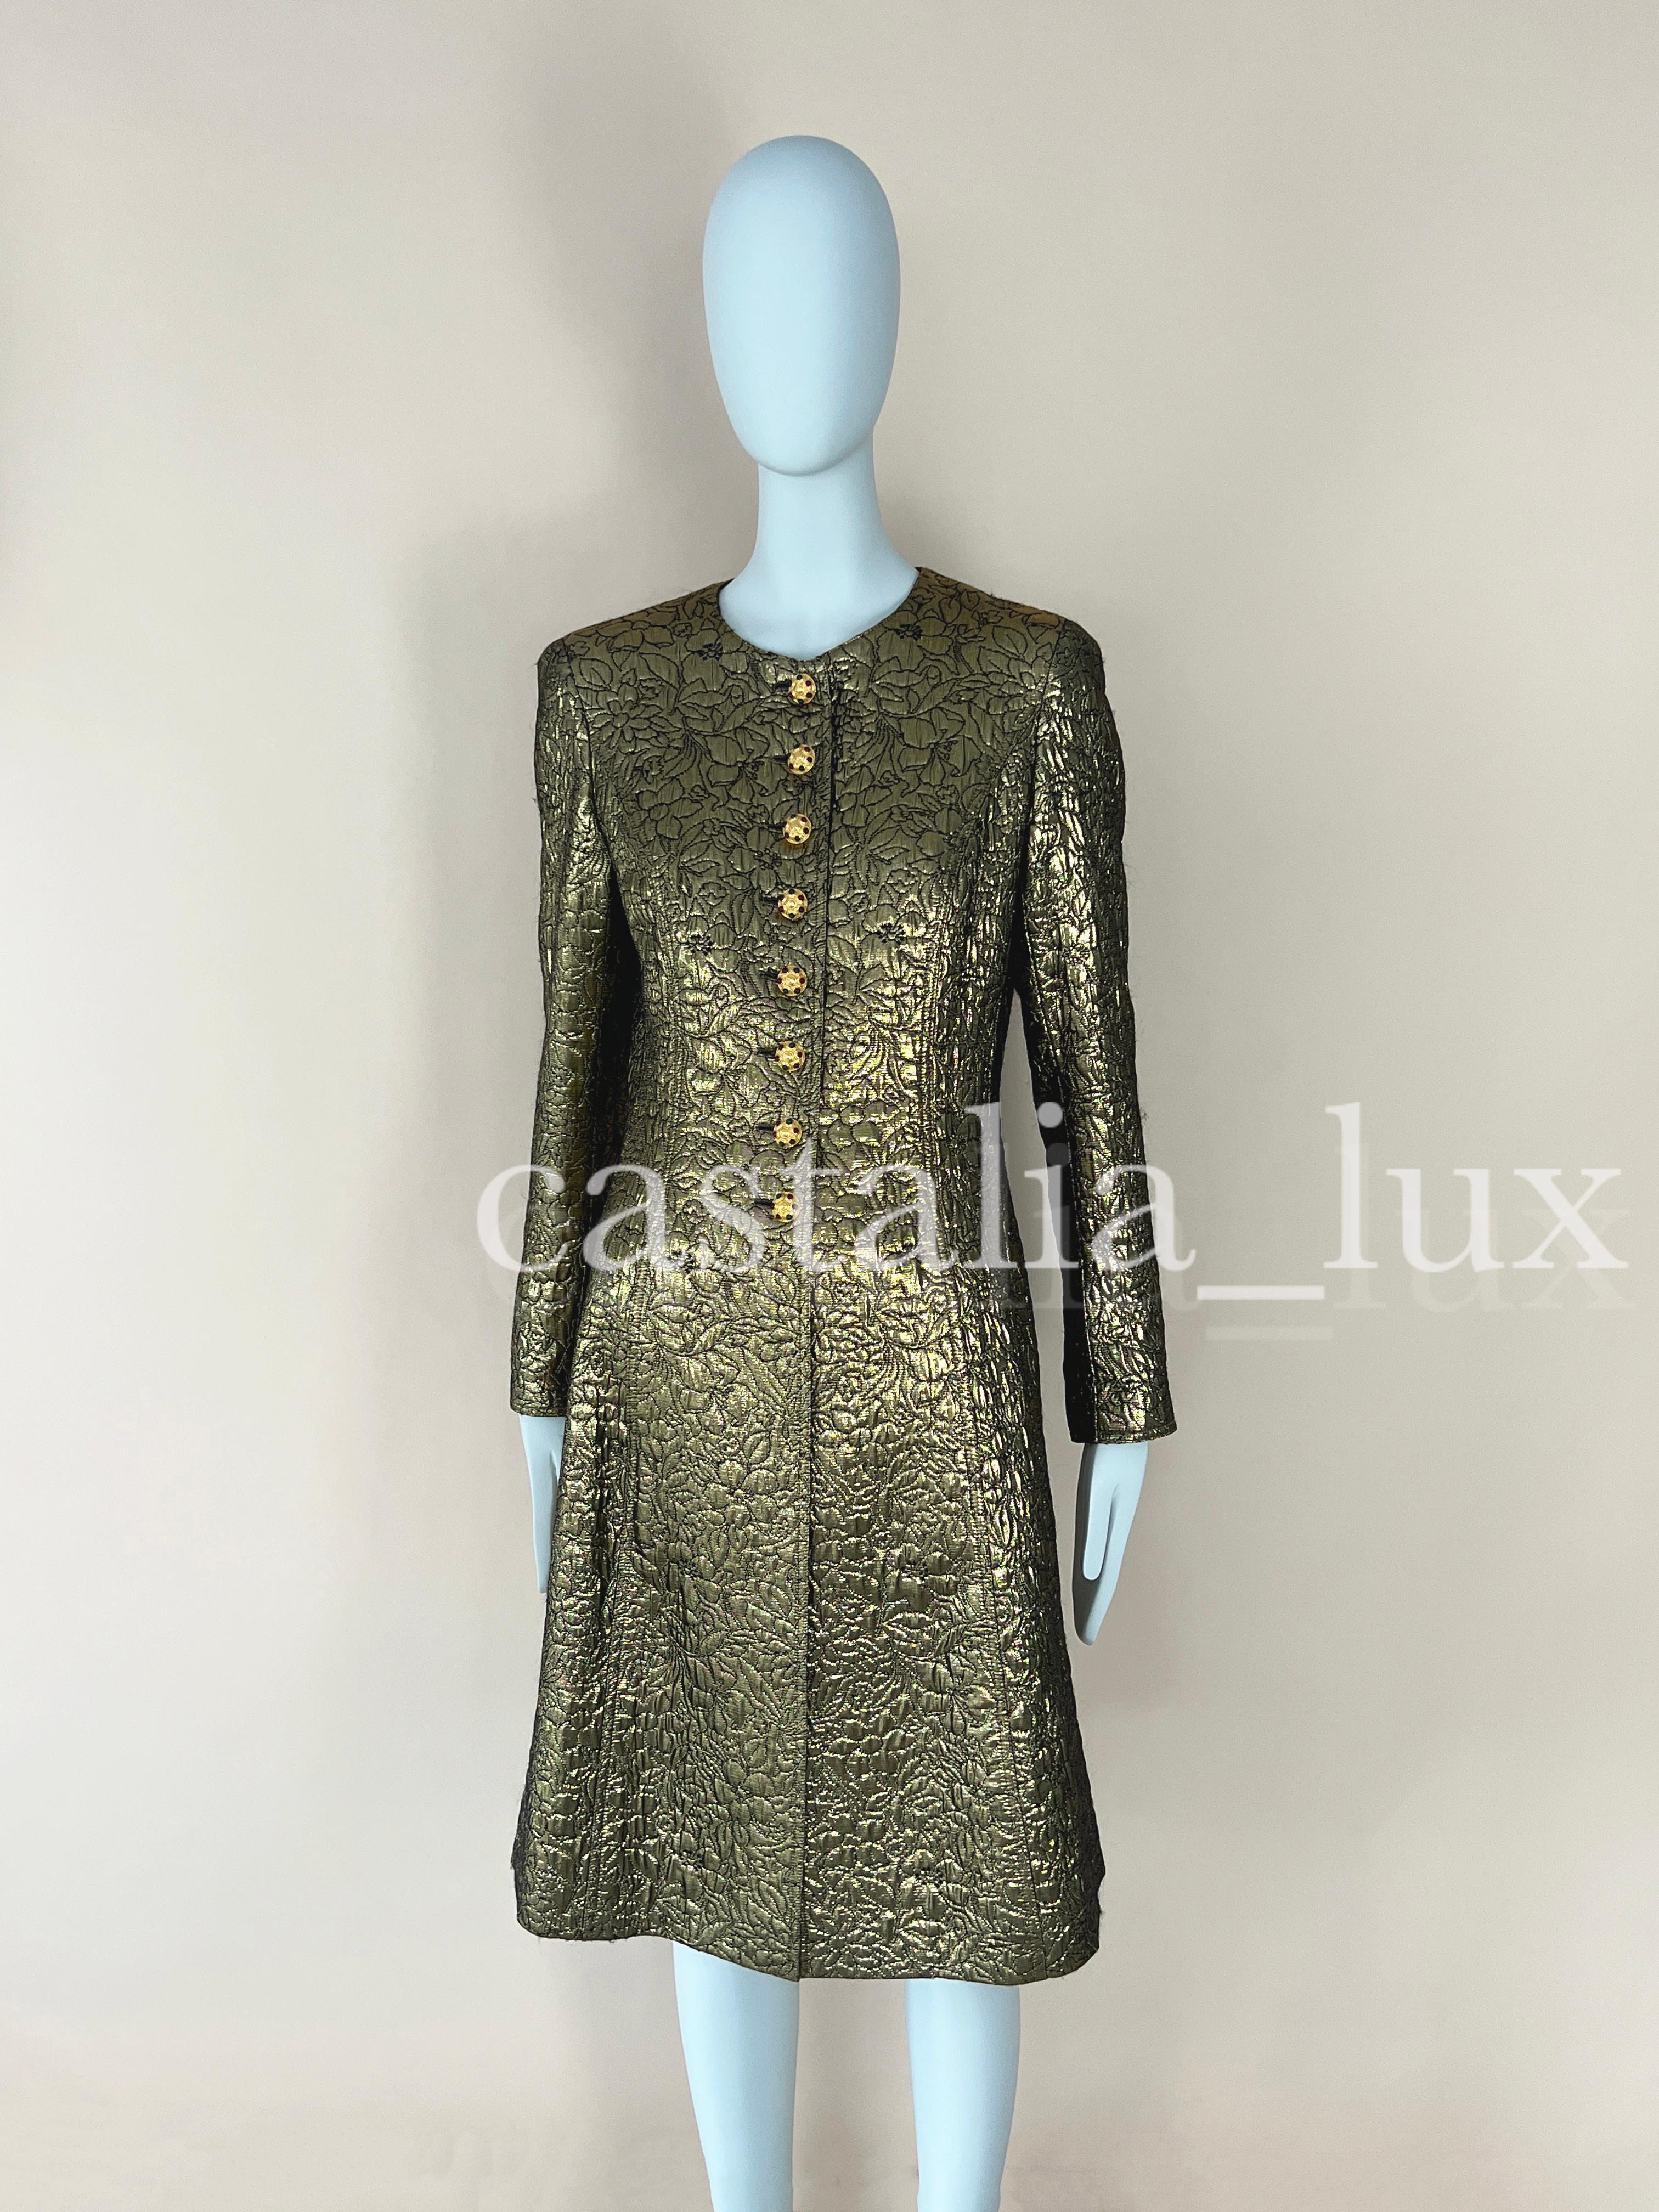 Chanel Rare Collectible CC Jewel Buttons Brocade Jacket  For Sale 10